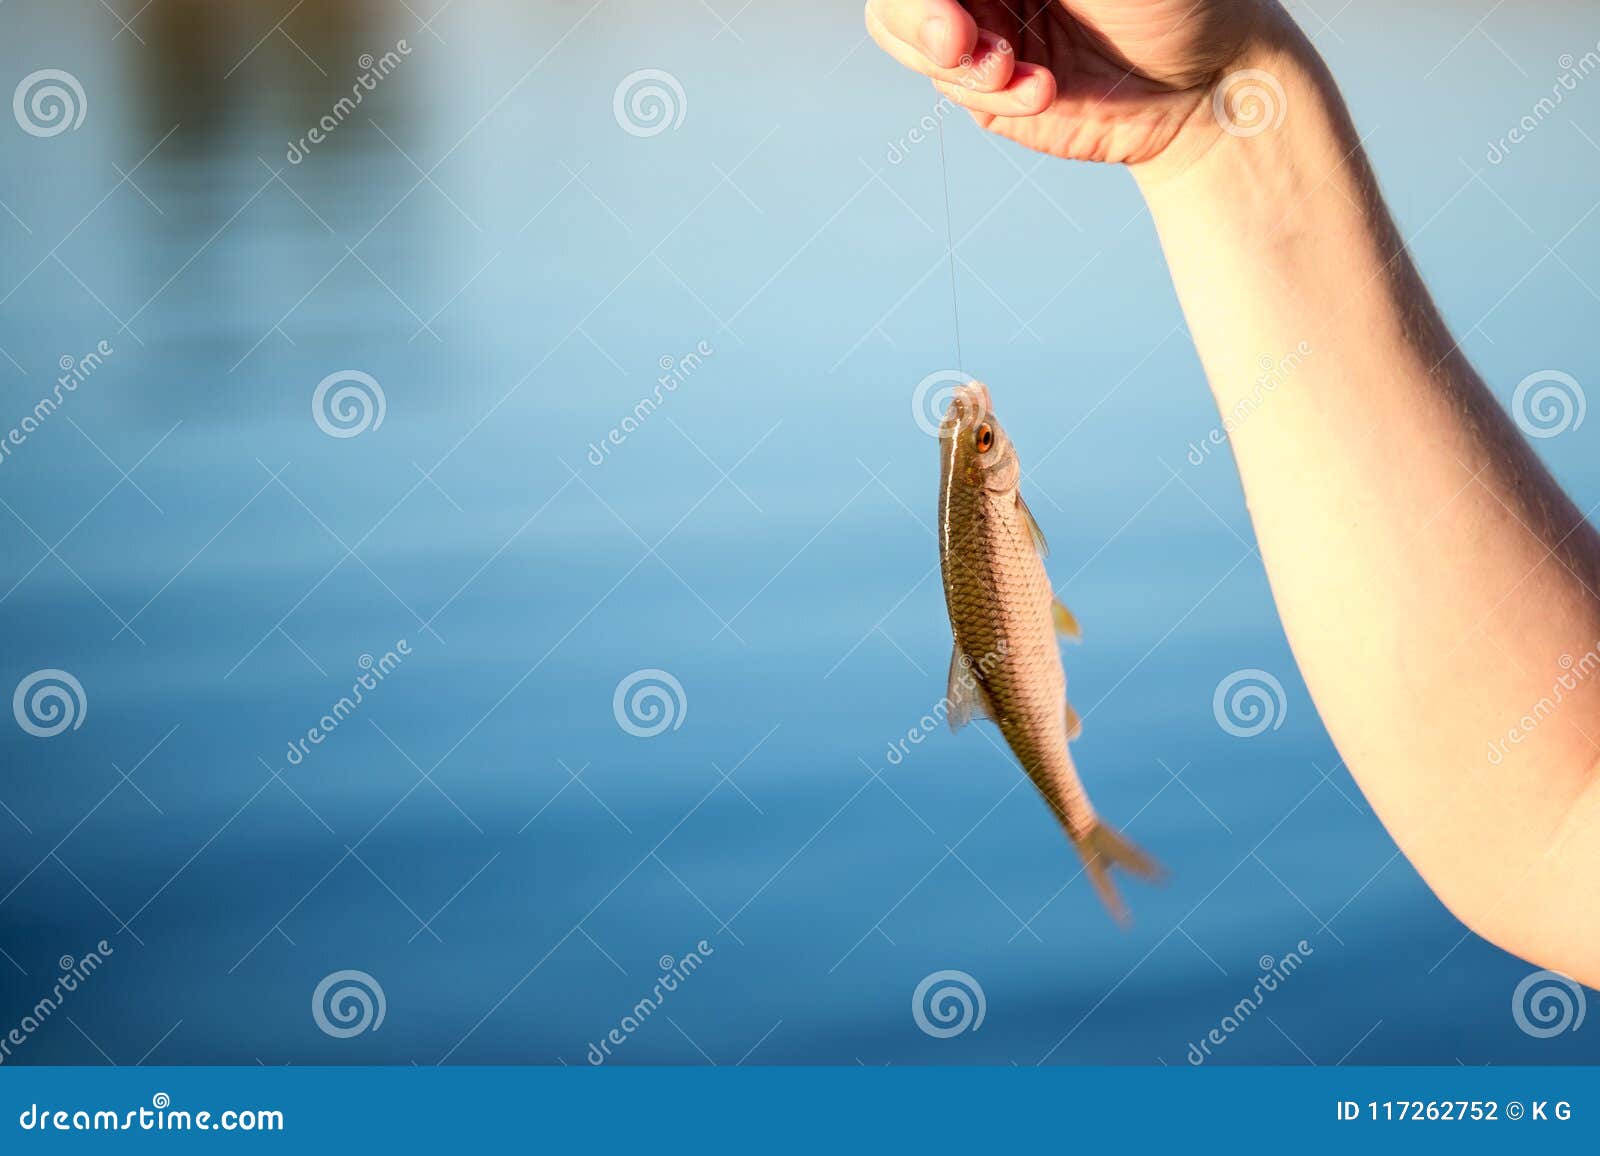 https://thumbs.dreamstime.com/z/close-up-small-redeye-fish-hook-hand-against-blue-lake-river-water-newcomer-fishing-background-copyspace-117262752.jpg